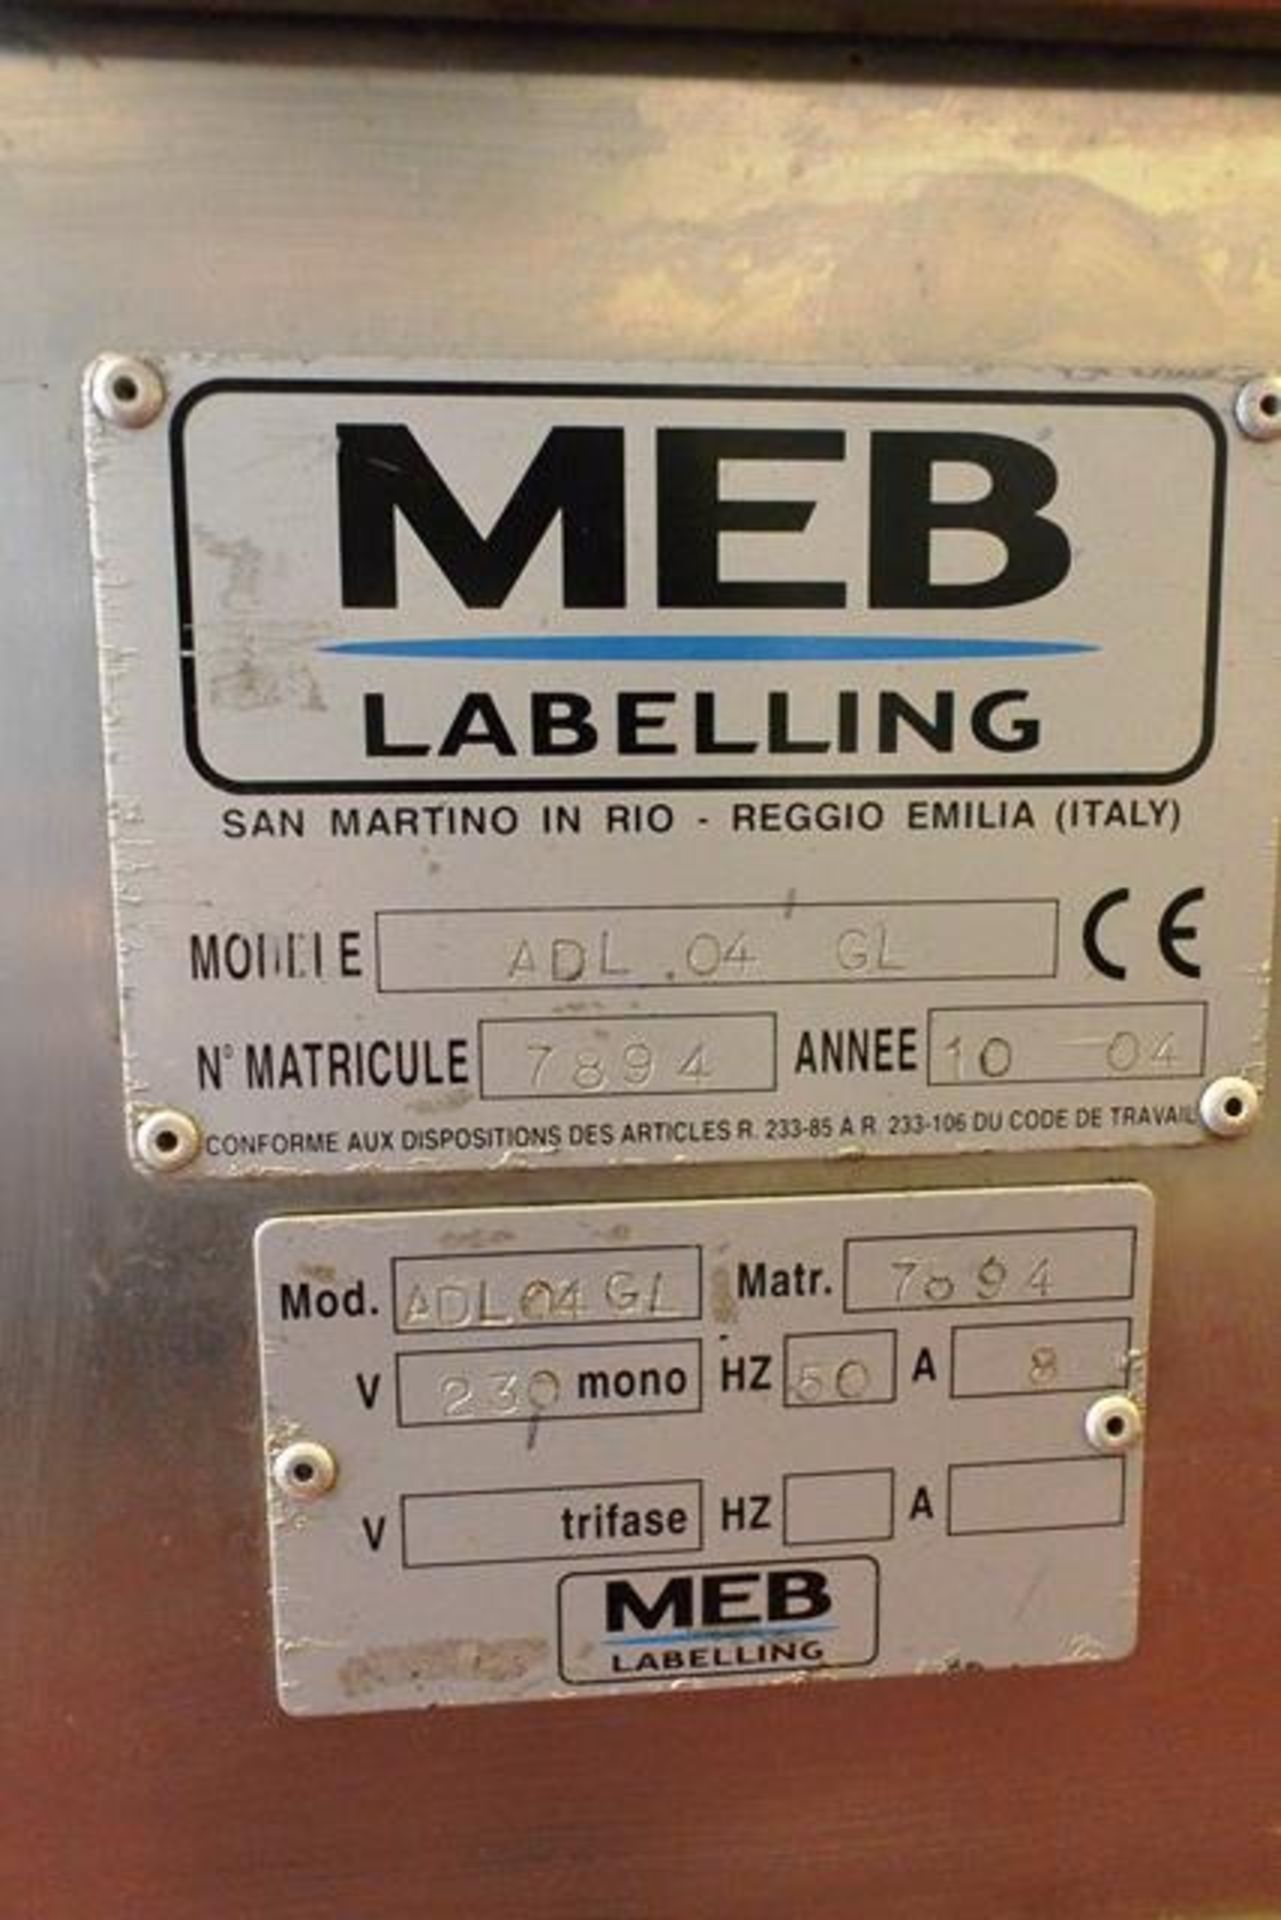 MEB ADL.04 GL stainless steel automatic labelling machine, serial no. 7894 (2004) (3 phase), with - Image 2 of 9